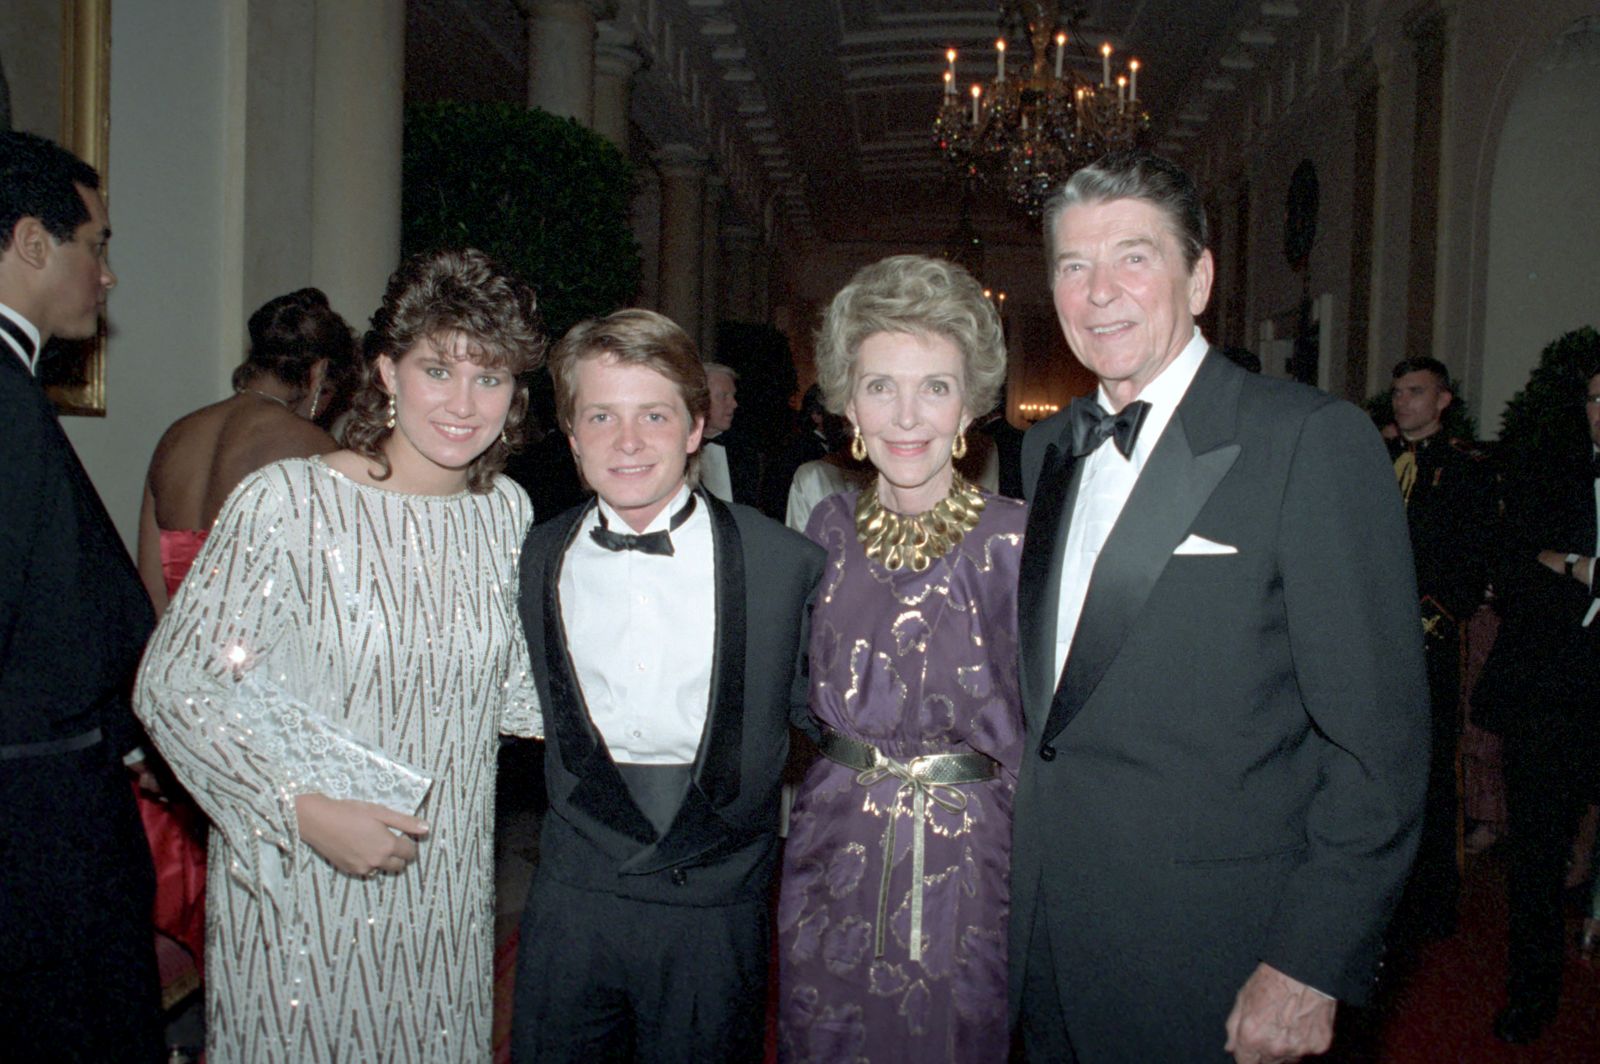 10/8/1985 The Reagans with Michael J. Fox and Nancy McKeon at a State Dinner for Prime Minister Lee Kuan Yew of Singapore